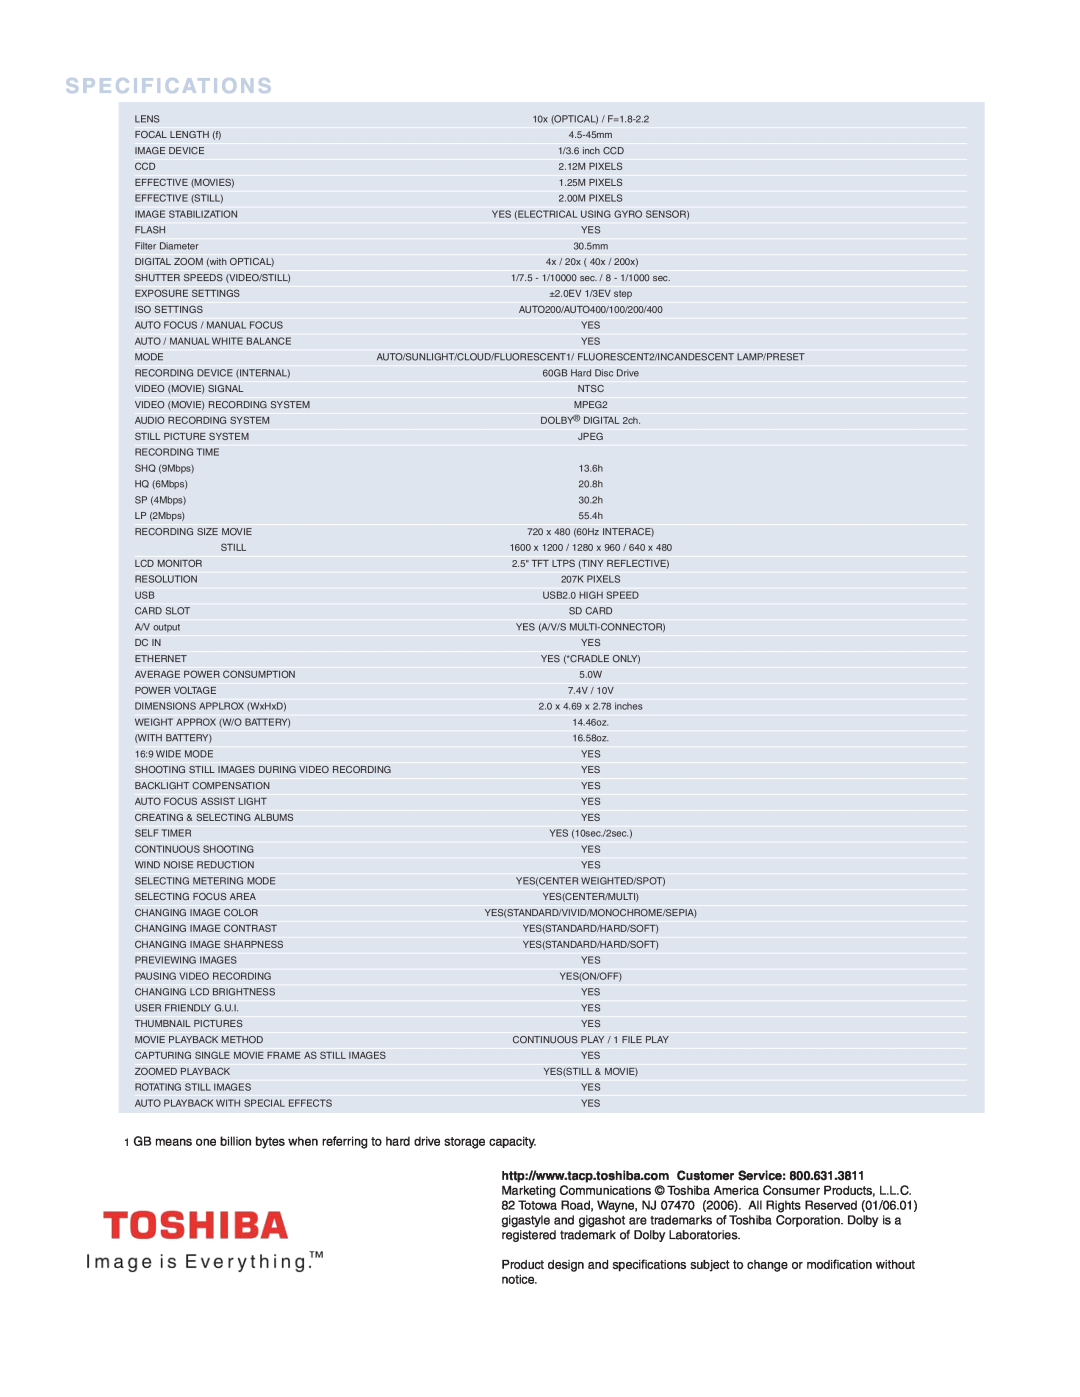 Toshiba GSC-R60 manual Specifications 